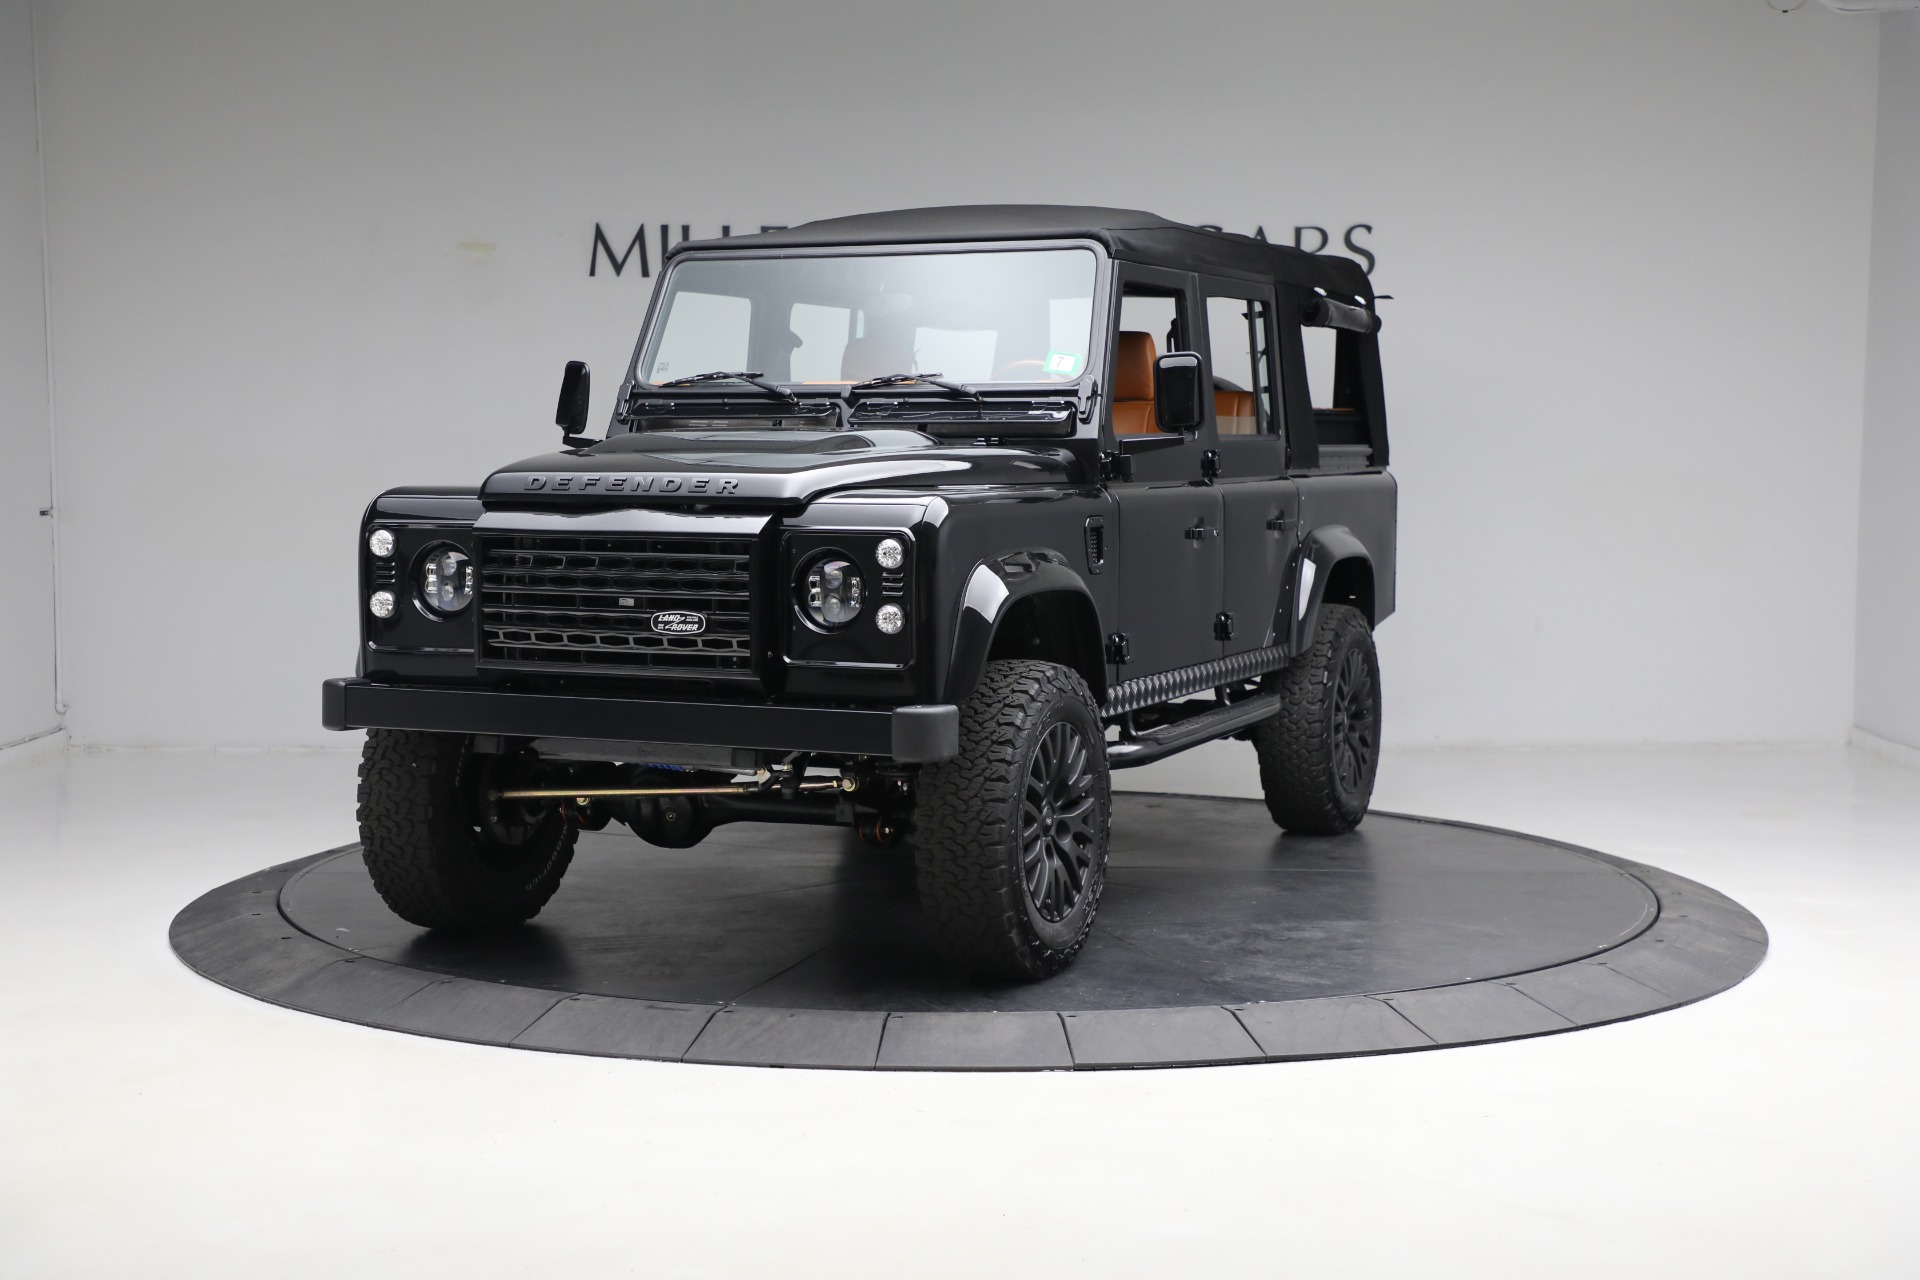 Used 1993 Land Rover Defender 110 for sale $195,900 at Rolls-Royce Motor Cars Greenwich in Greenwich CT 06830 1